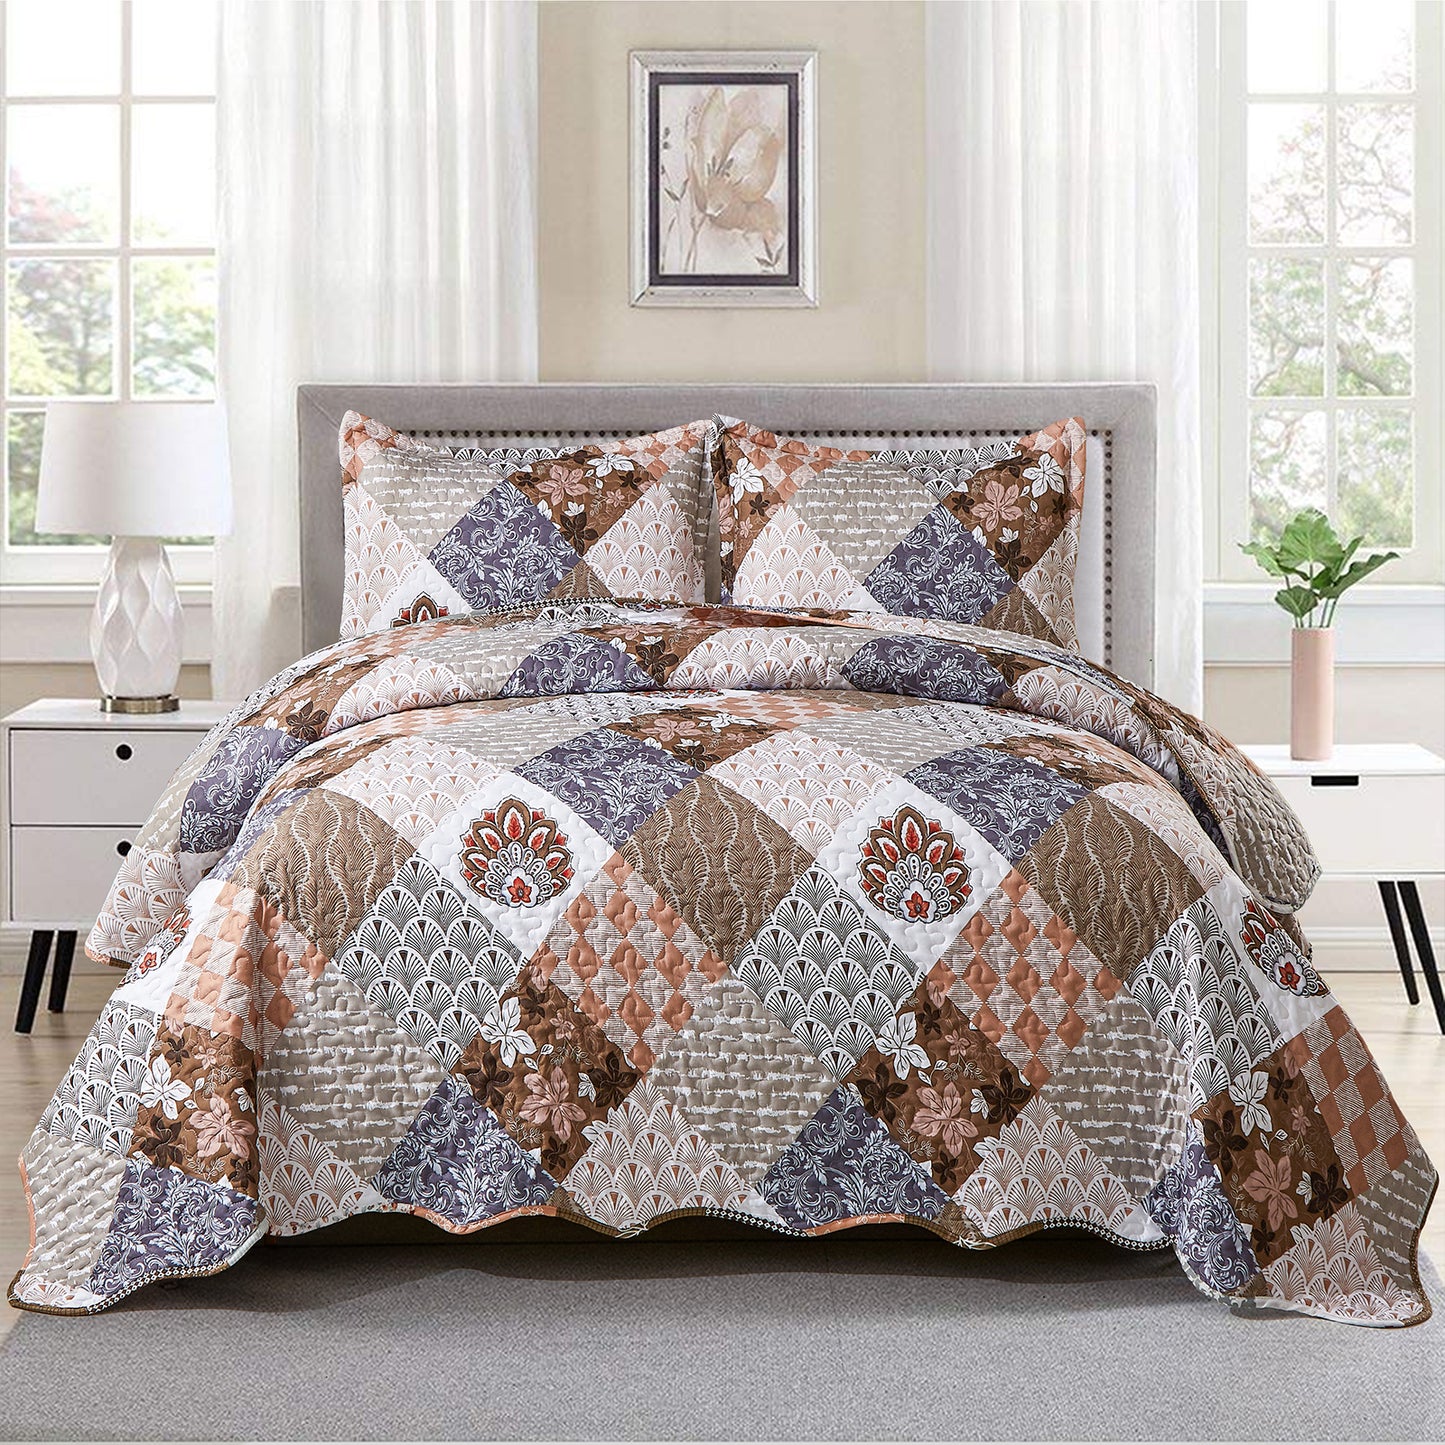 Colorful Floral Lattice Stitching 3 Pieces Quilt Set with 2 Pillowcases